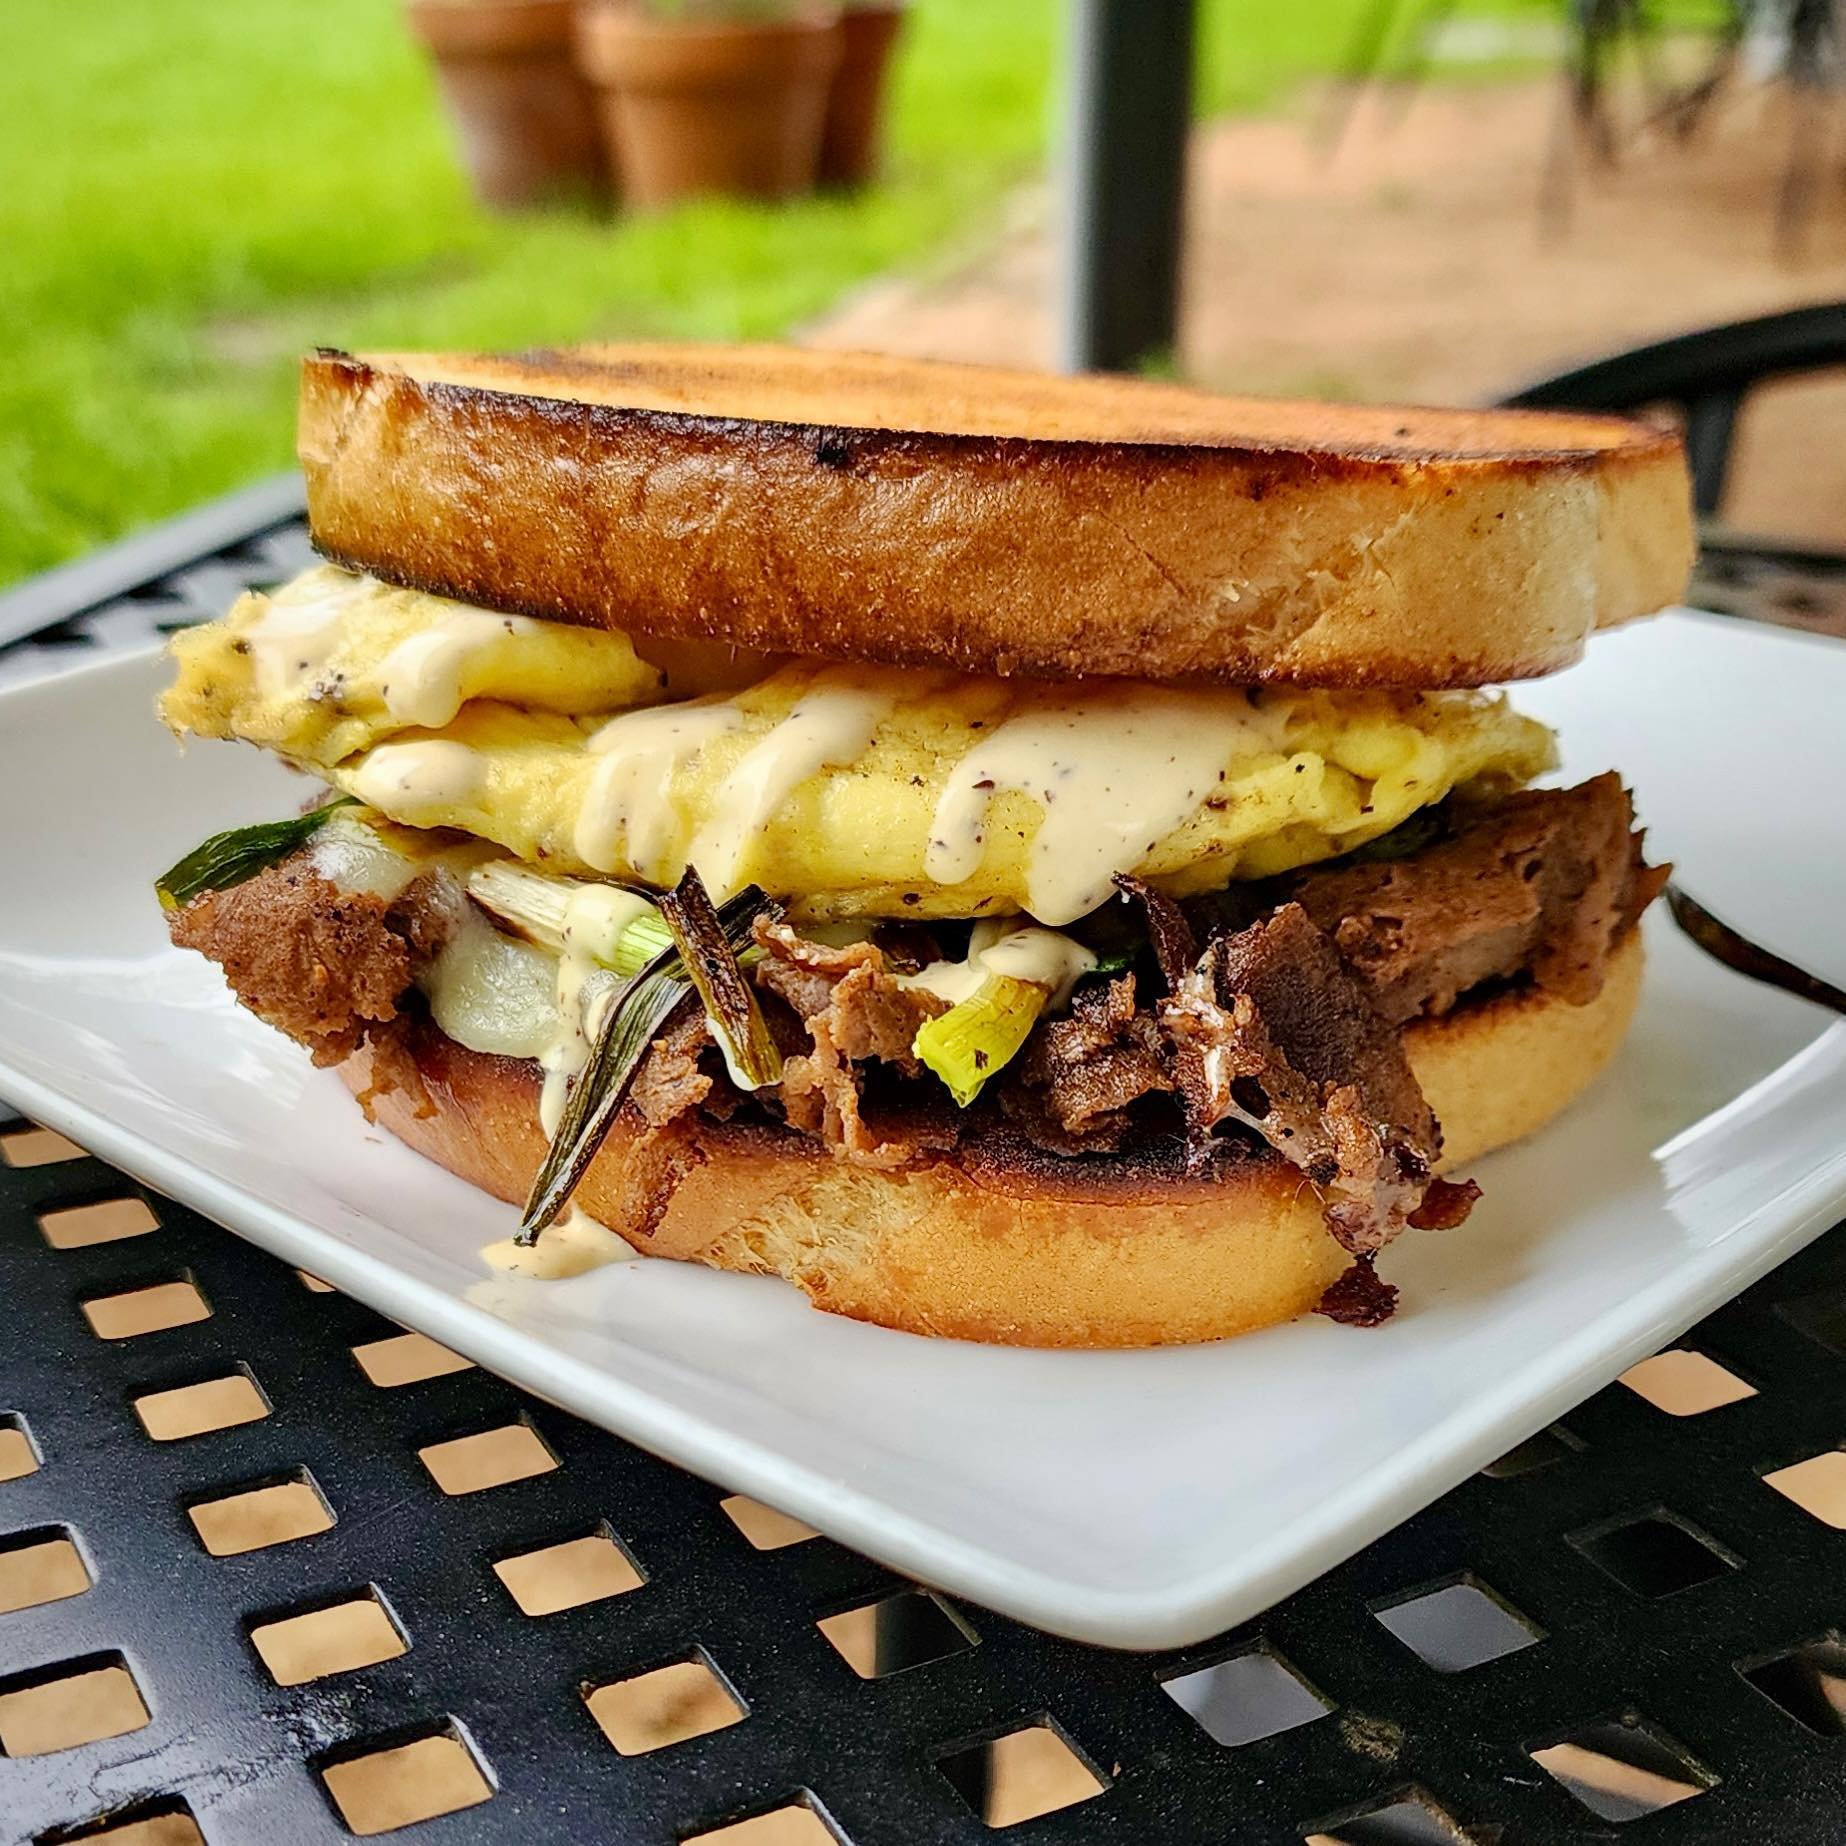 ✨Steak and Egg Sandwoch✨
We were in the mood for steak and eggs this week!! 🥩🍳🍞 Two scrambled eggs topped with thinly sliced ribeye seared with southwest seasoning, sharp white cheddar, charred green onions, and habanero crema, all on toasted sour